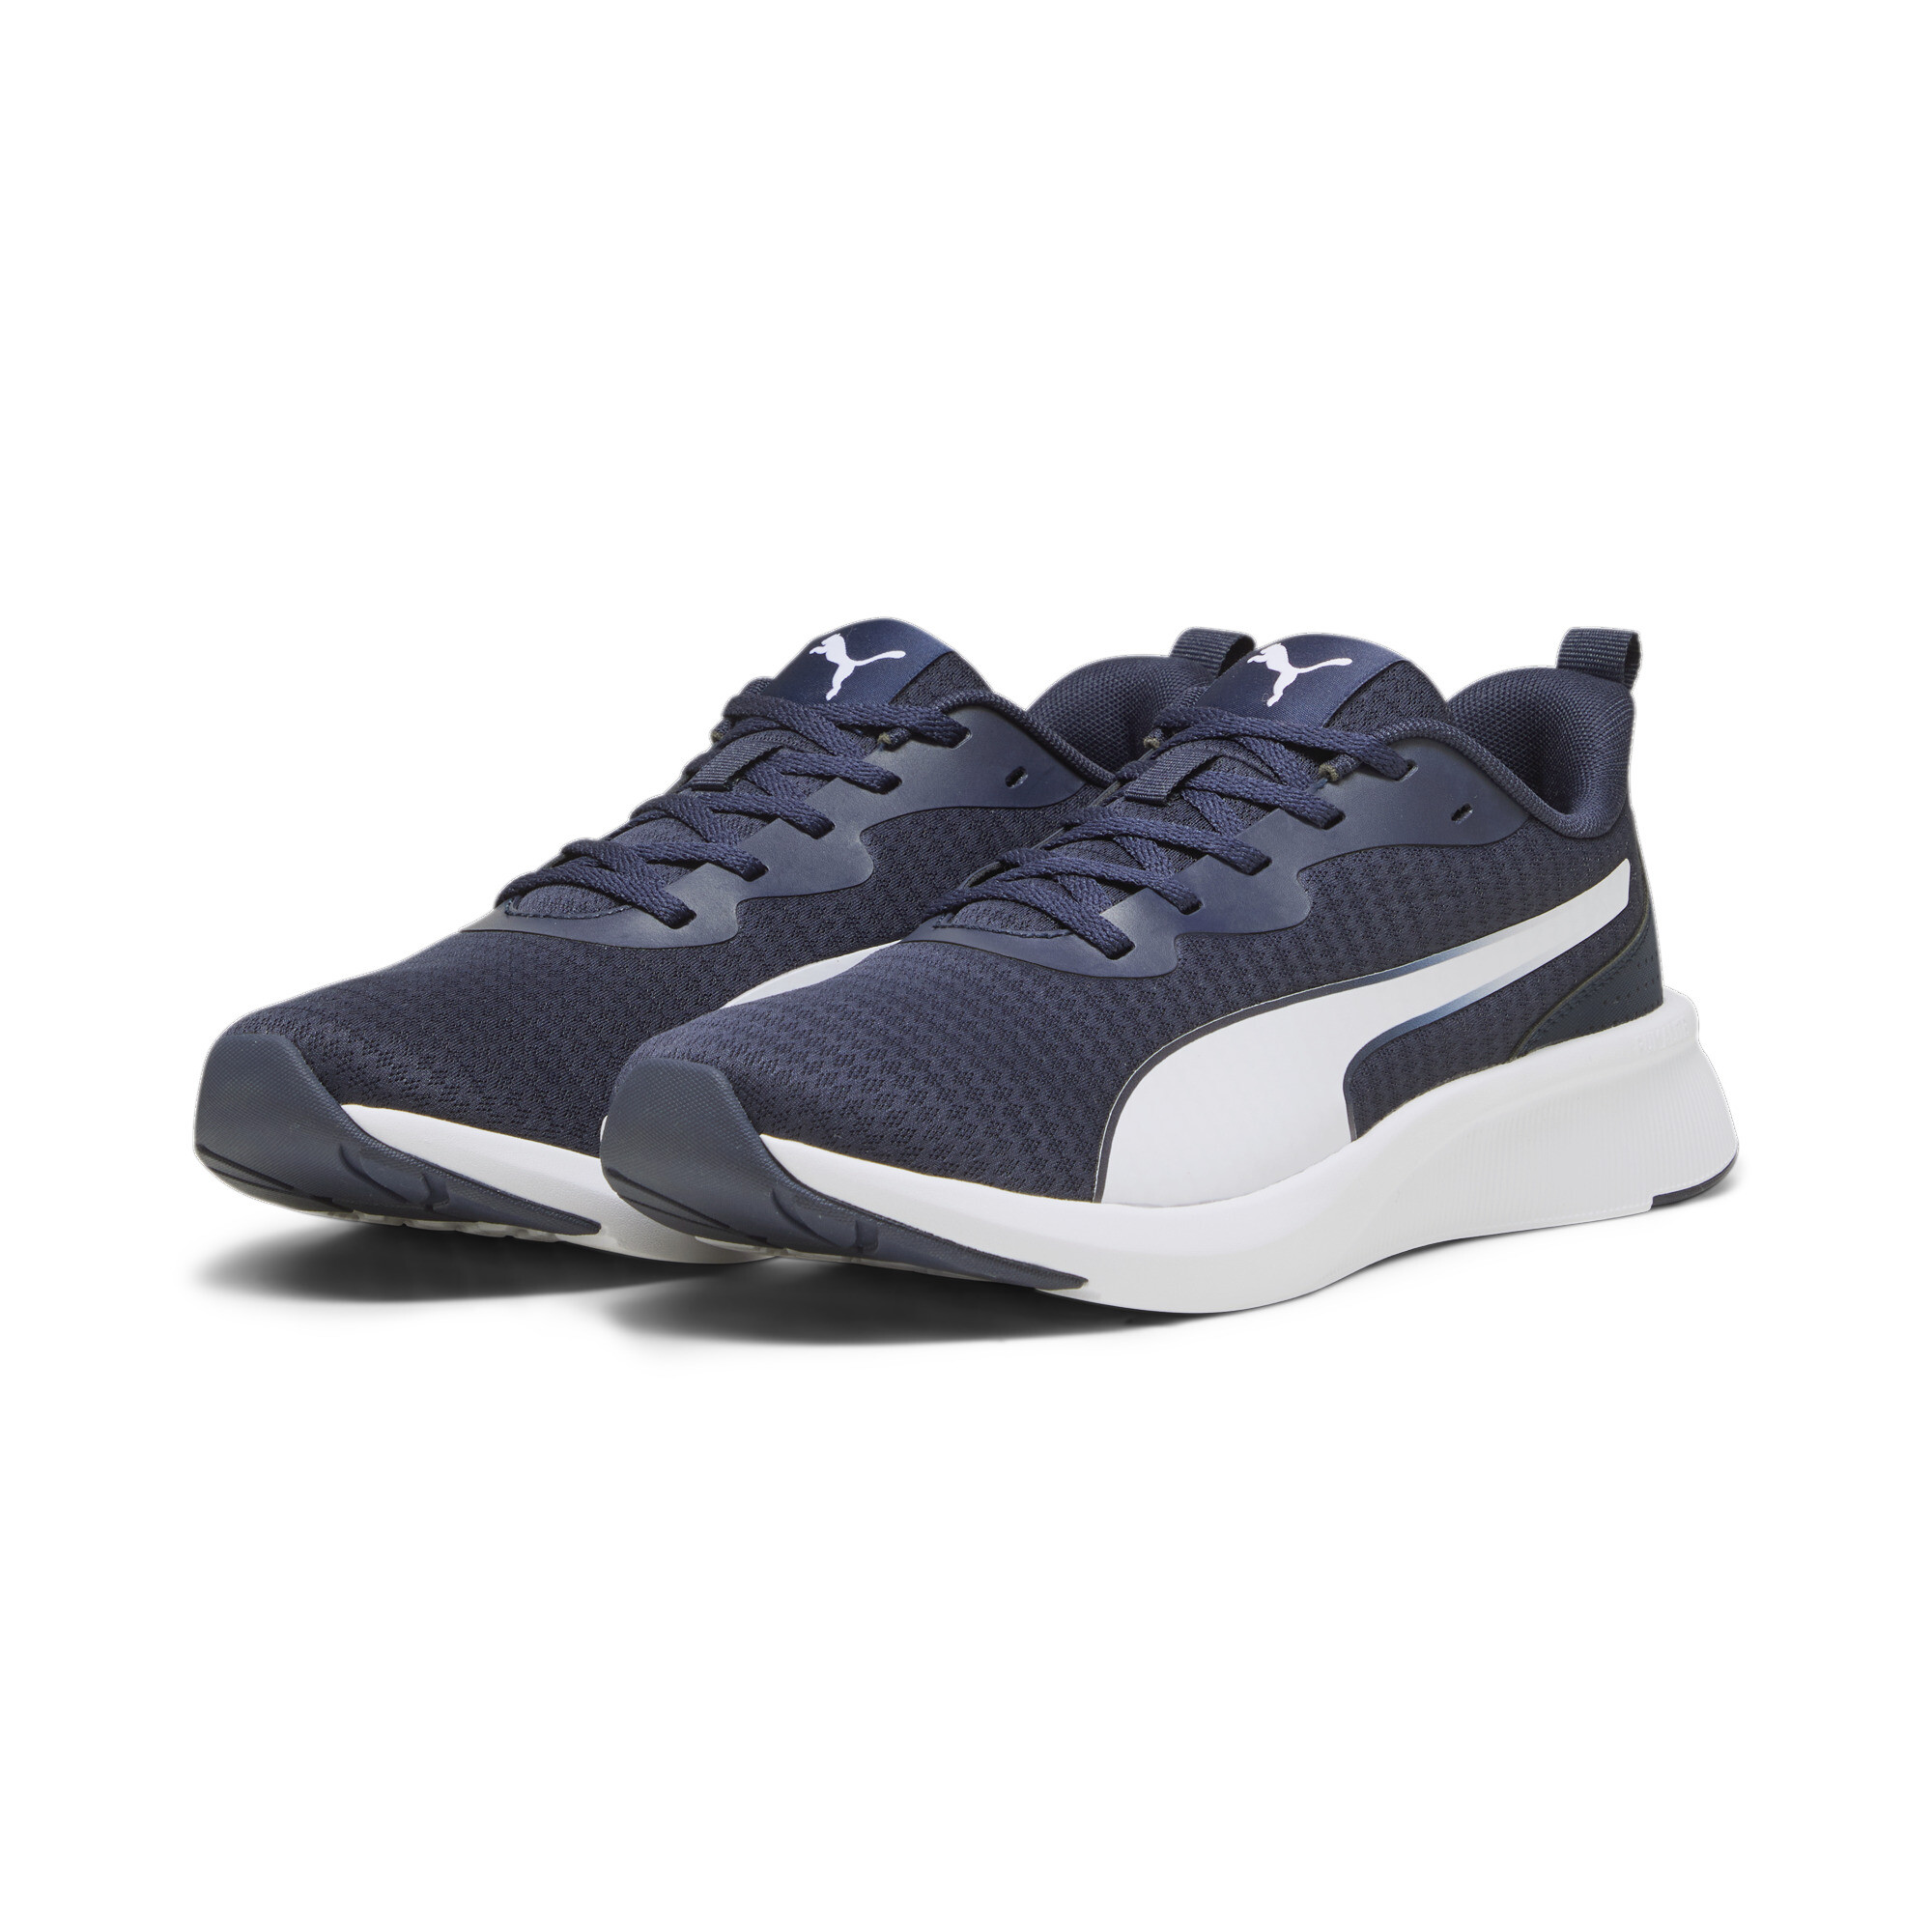 Puma Flyer Lite Running Shoes, Blue, Size 44.5, Shoes